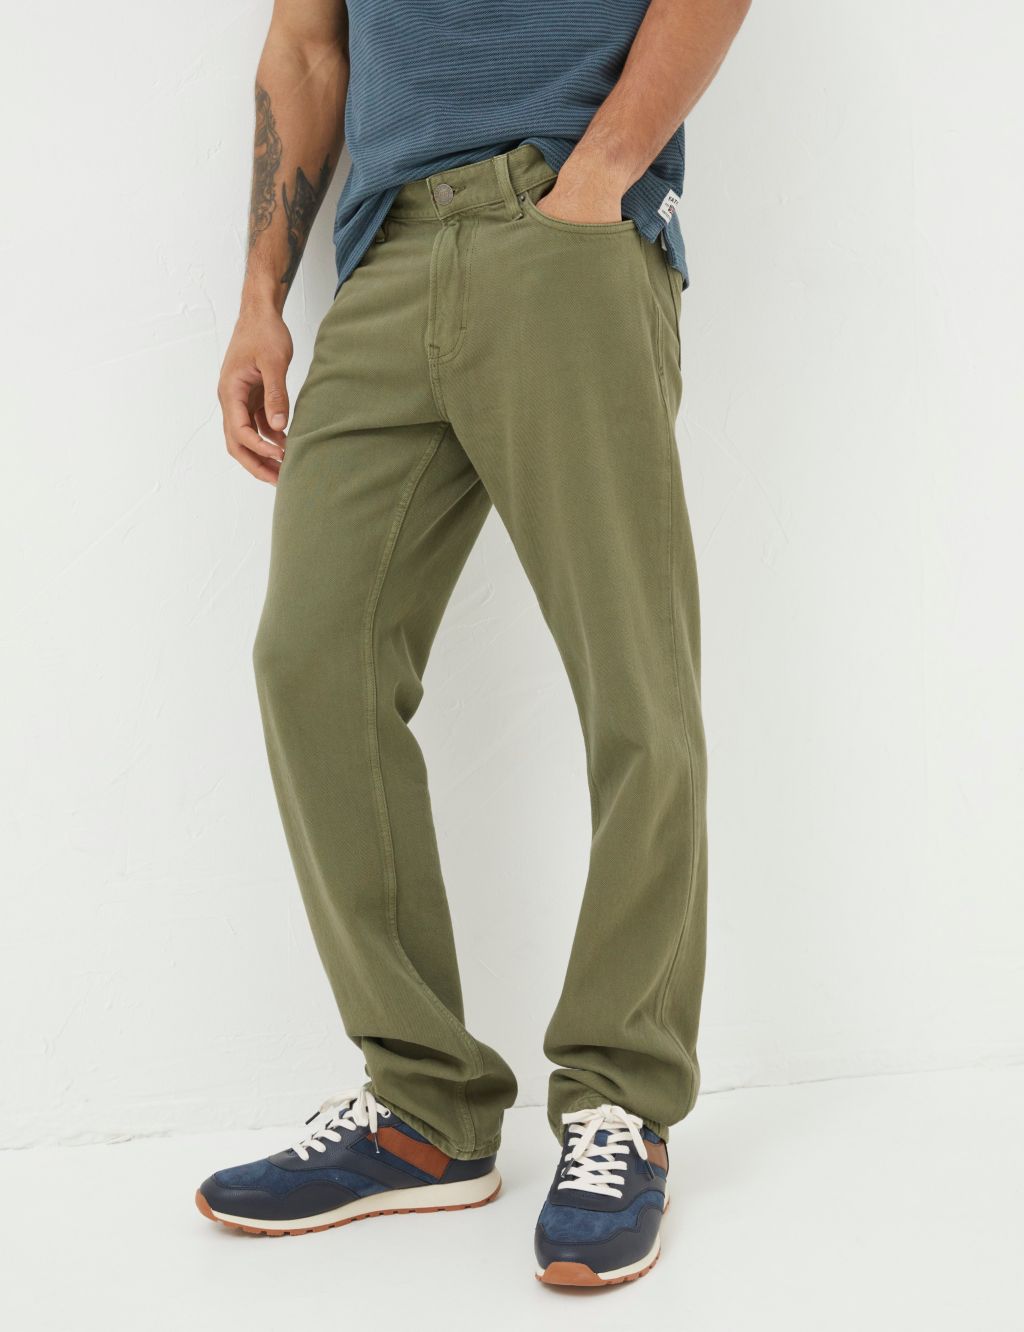 Pin on Men's Green Jeans